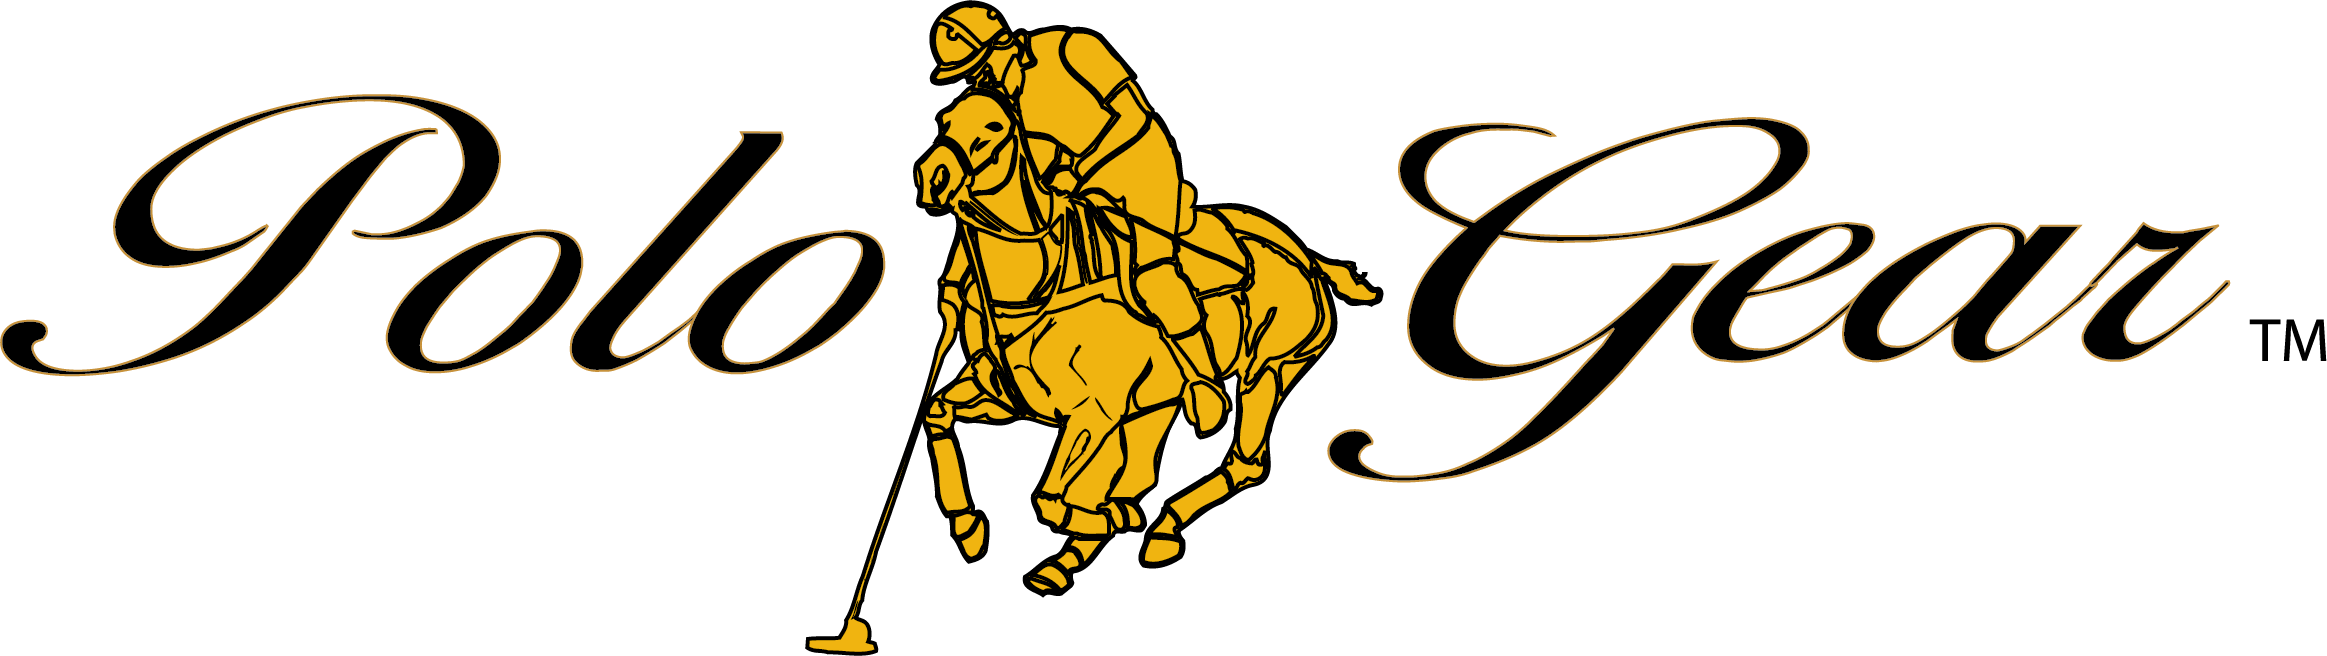 Polo Gear.png